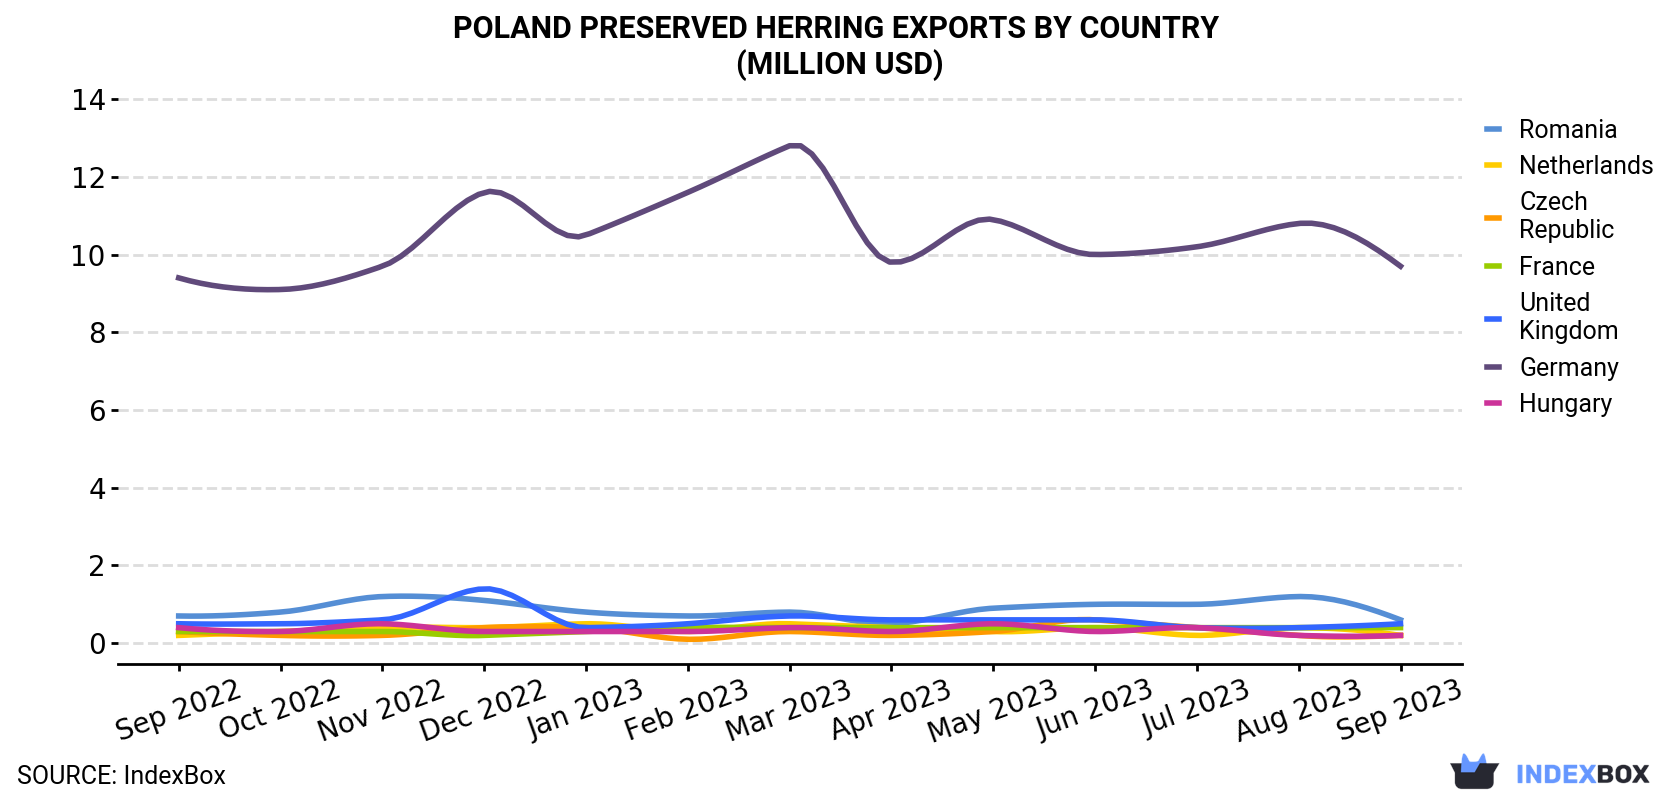 Poland Preserved Herring Exports By Country (Million USD)